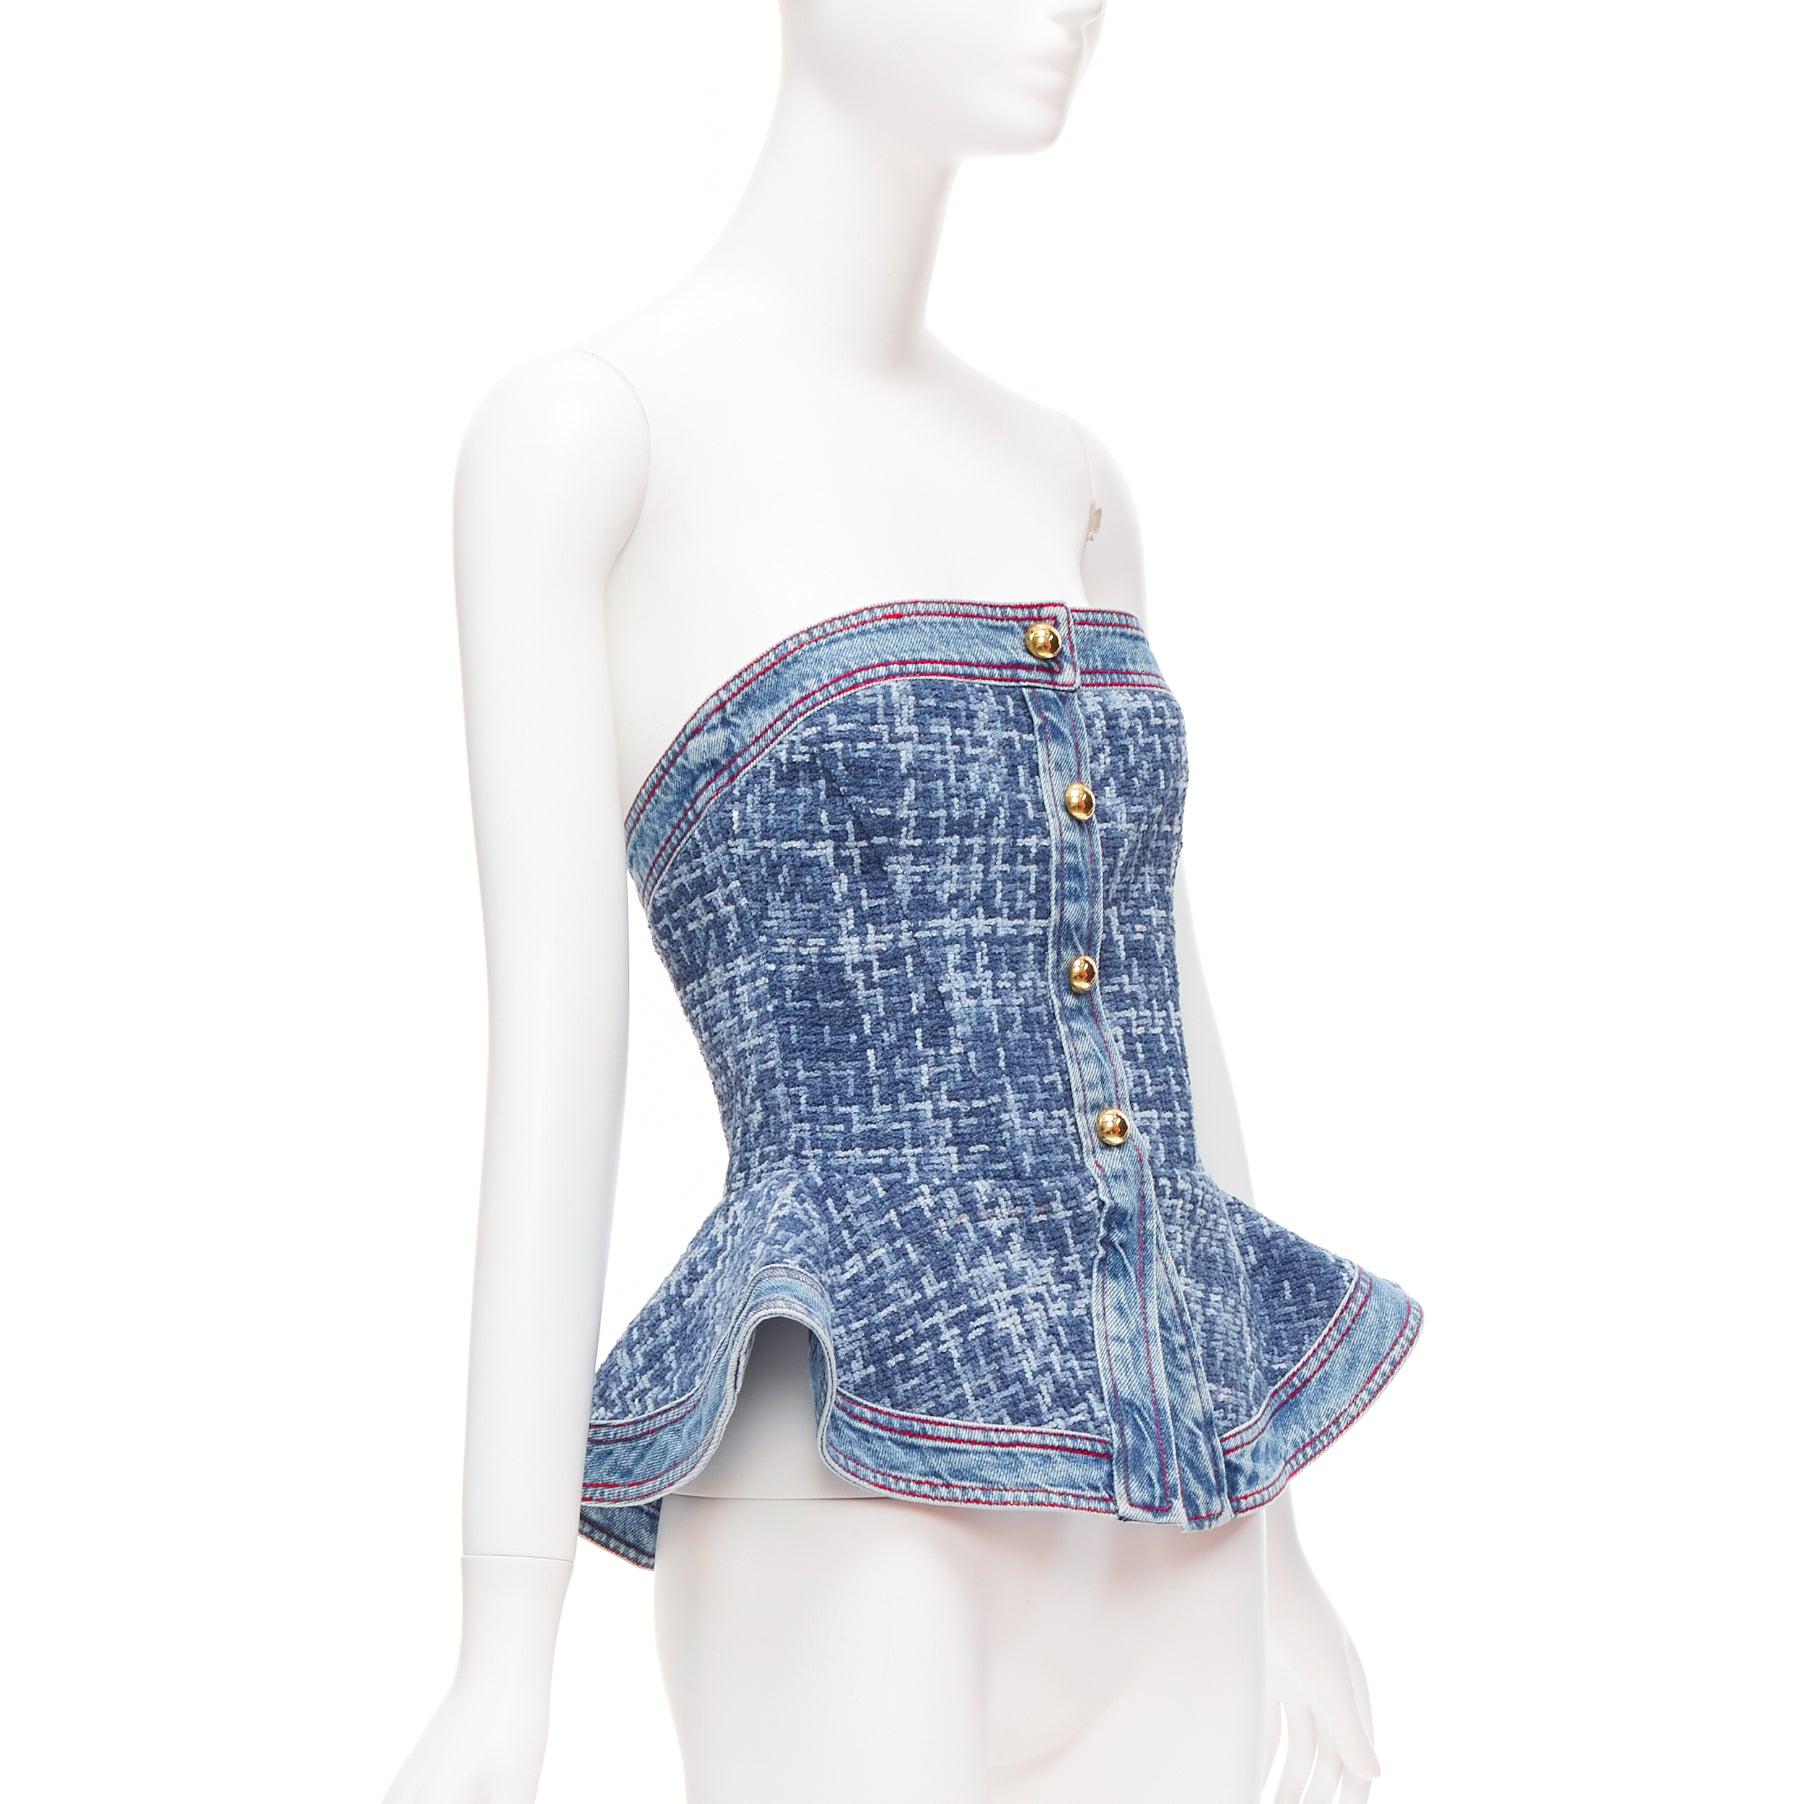 PHILOSOPHY LORENZO SERAFINI blue textured denim peplum corset bustier IT40 XS
Reference: AAWC/A00670
Brand: Philosophy
Designer: Lorenzo Serafini
As seen on: Alicia Keys
Material: Cotton
Color: Blue
Pattern: Solid
Closure: Zip
Extra Details: Hatch